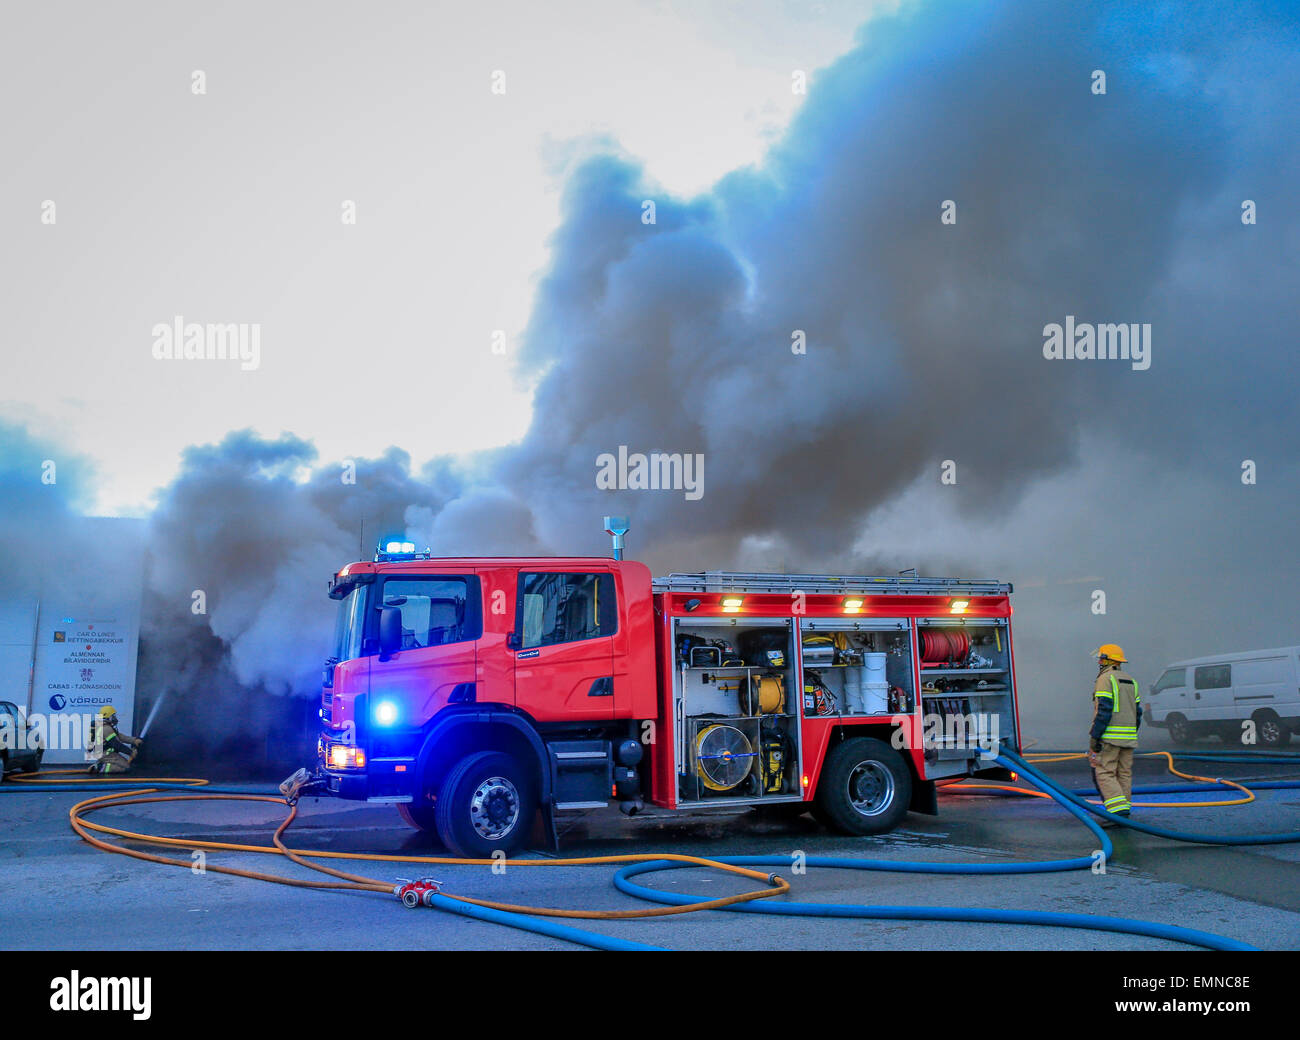 Firemen at the scene of a fire involving a small business. Kopavogur, Iceland Stock Photo